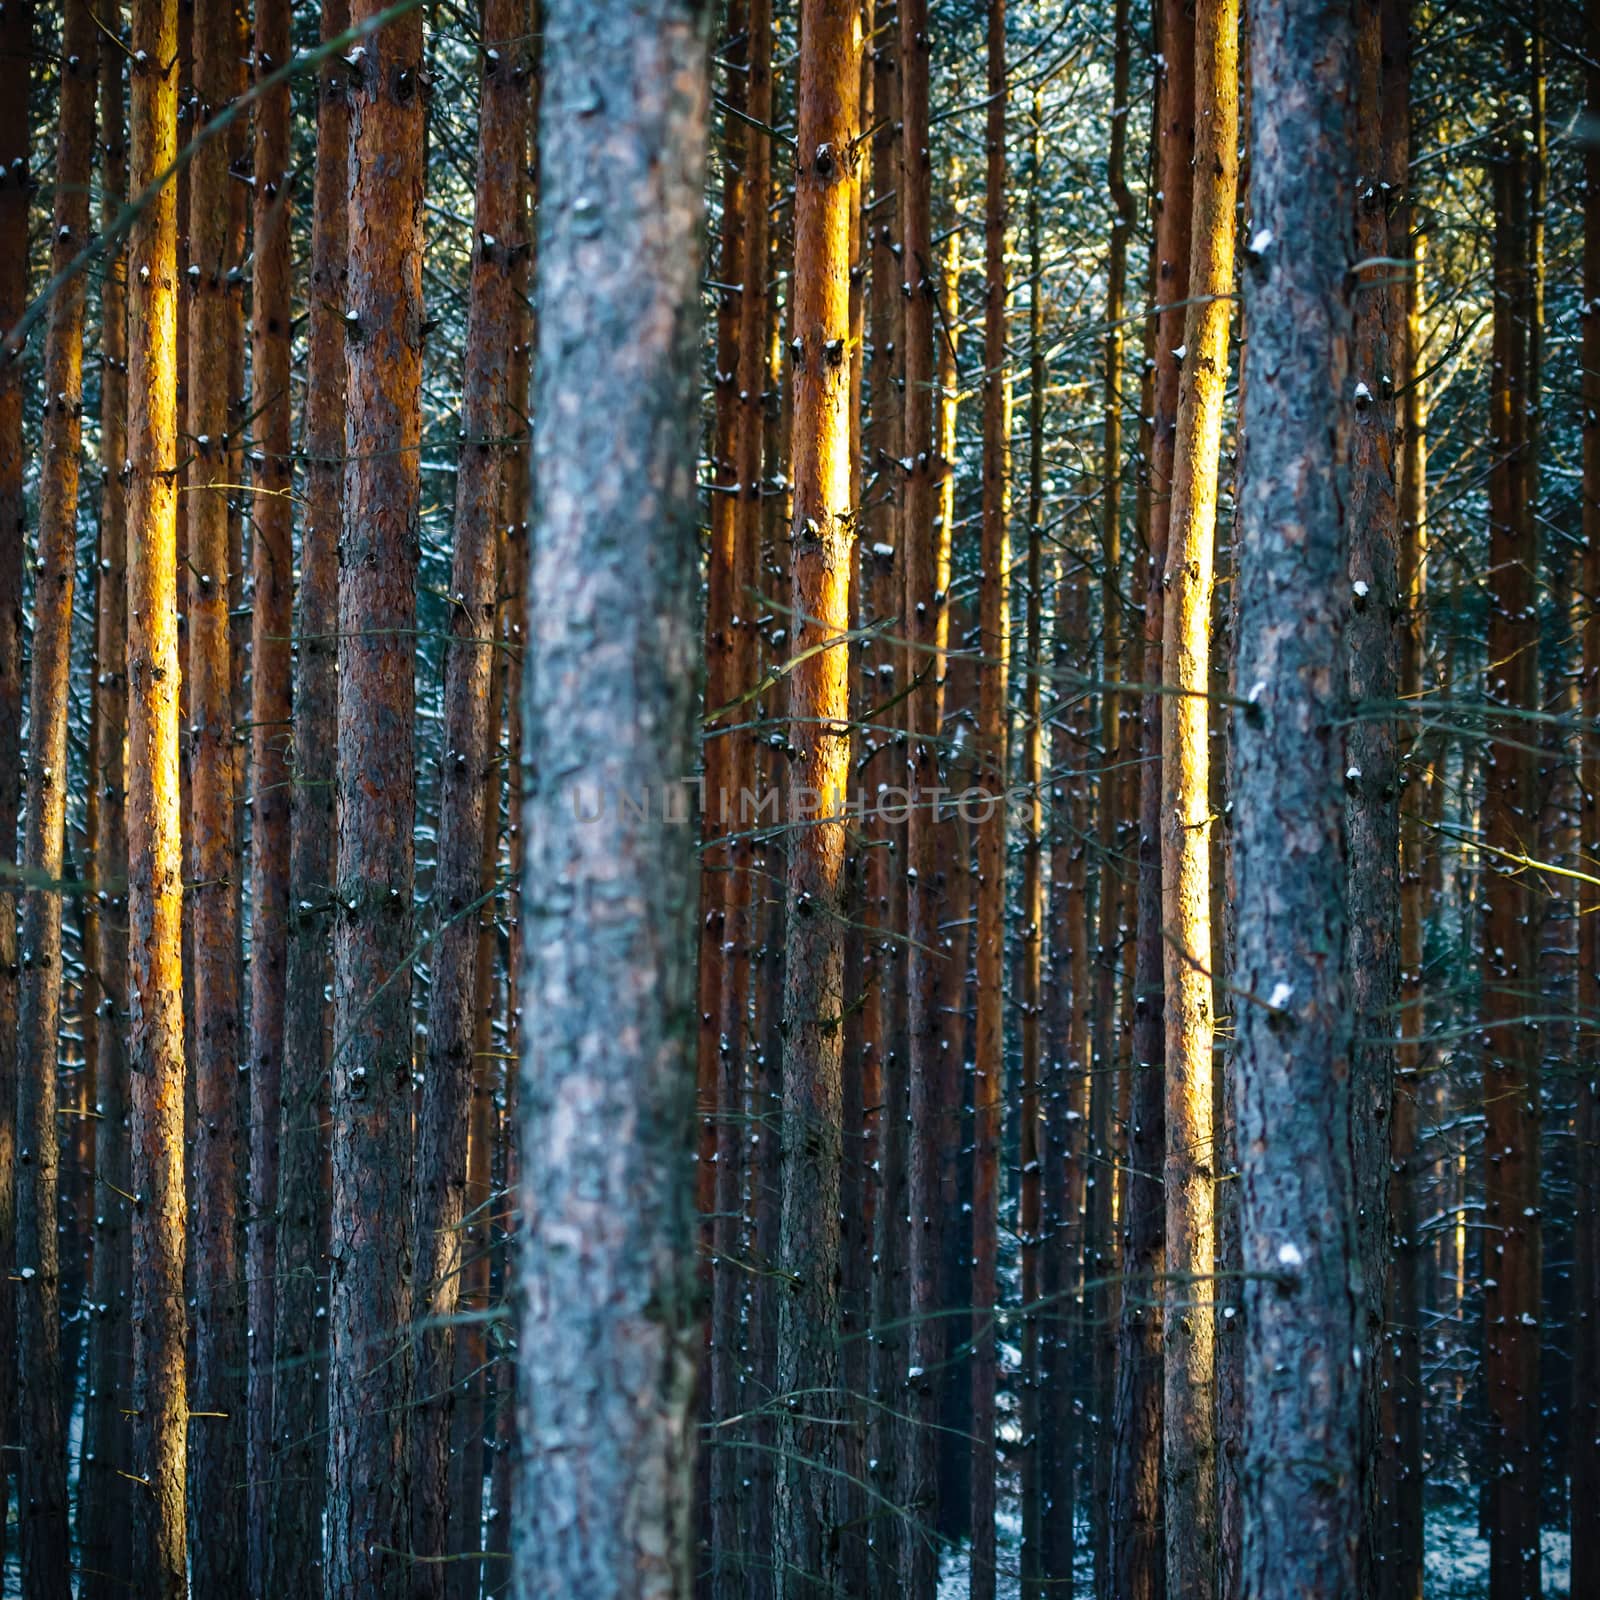 Sunlight in the cold forest, nature series